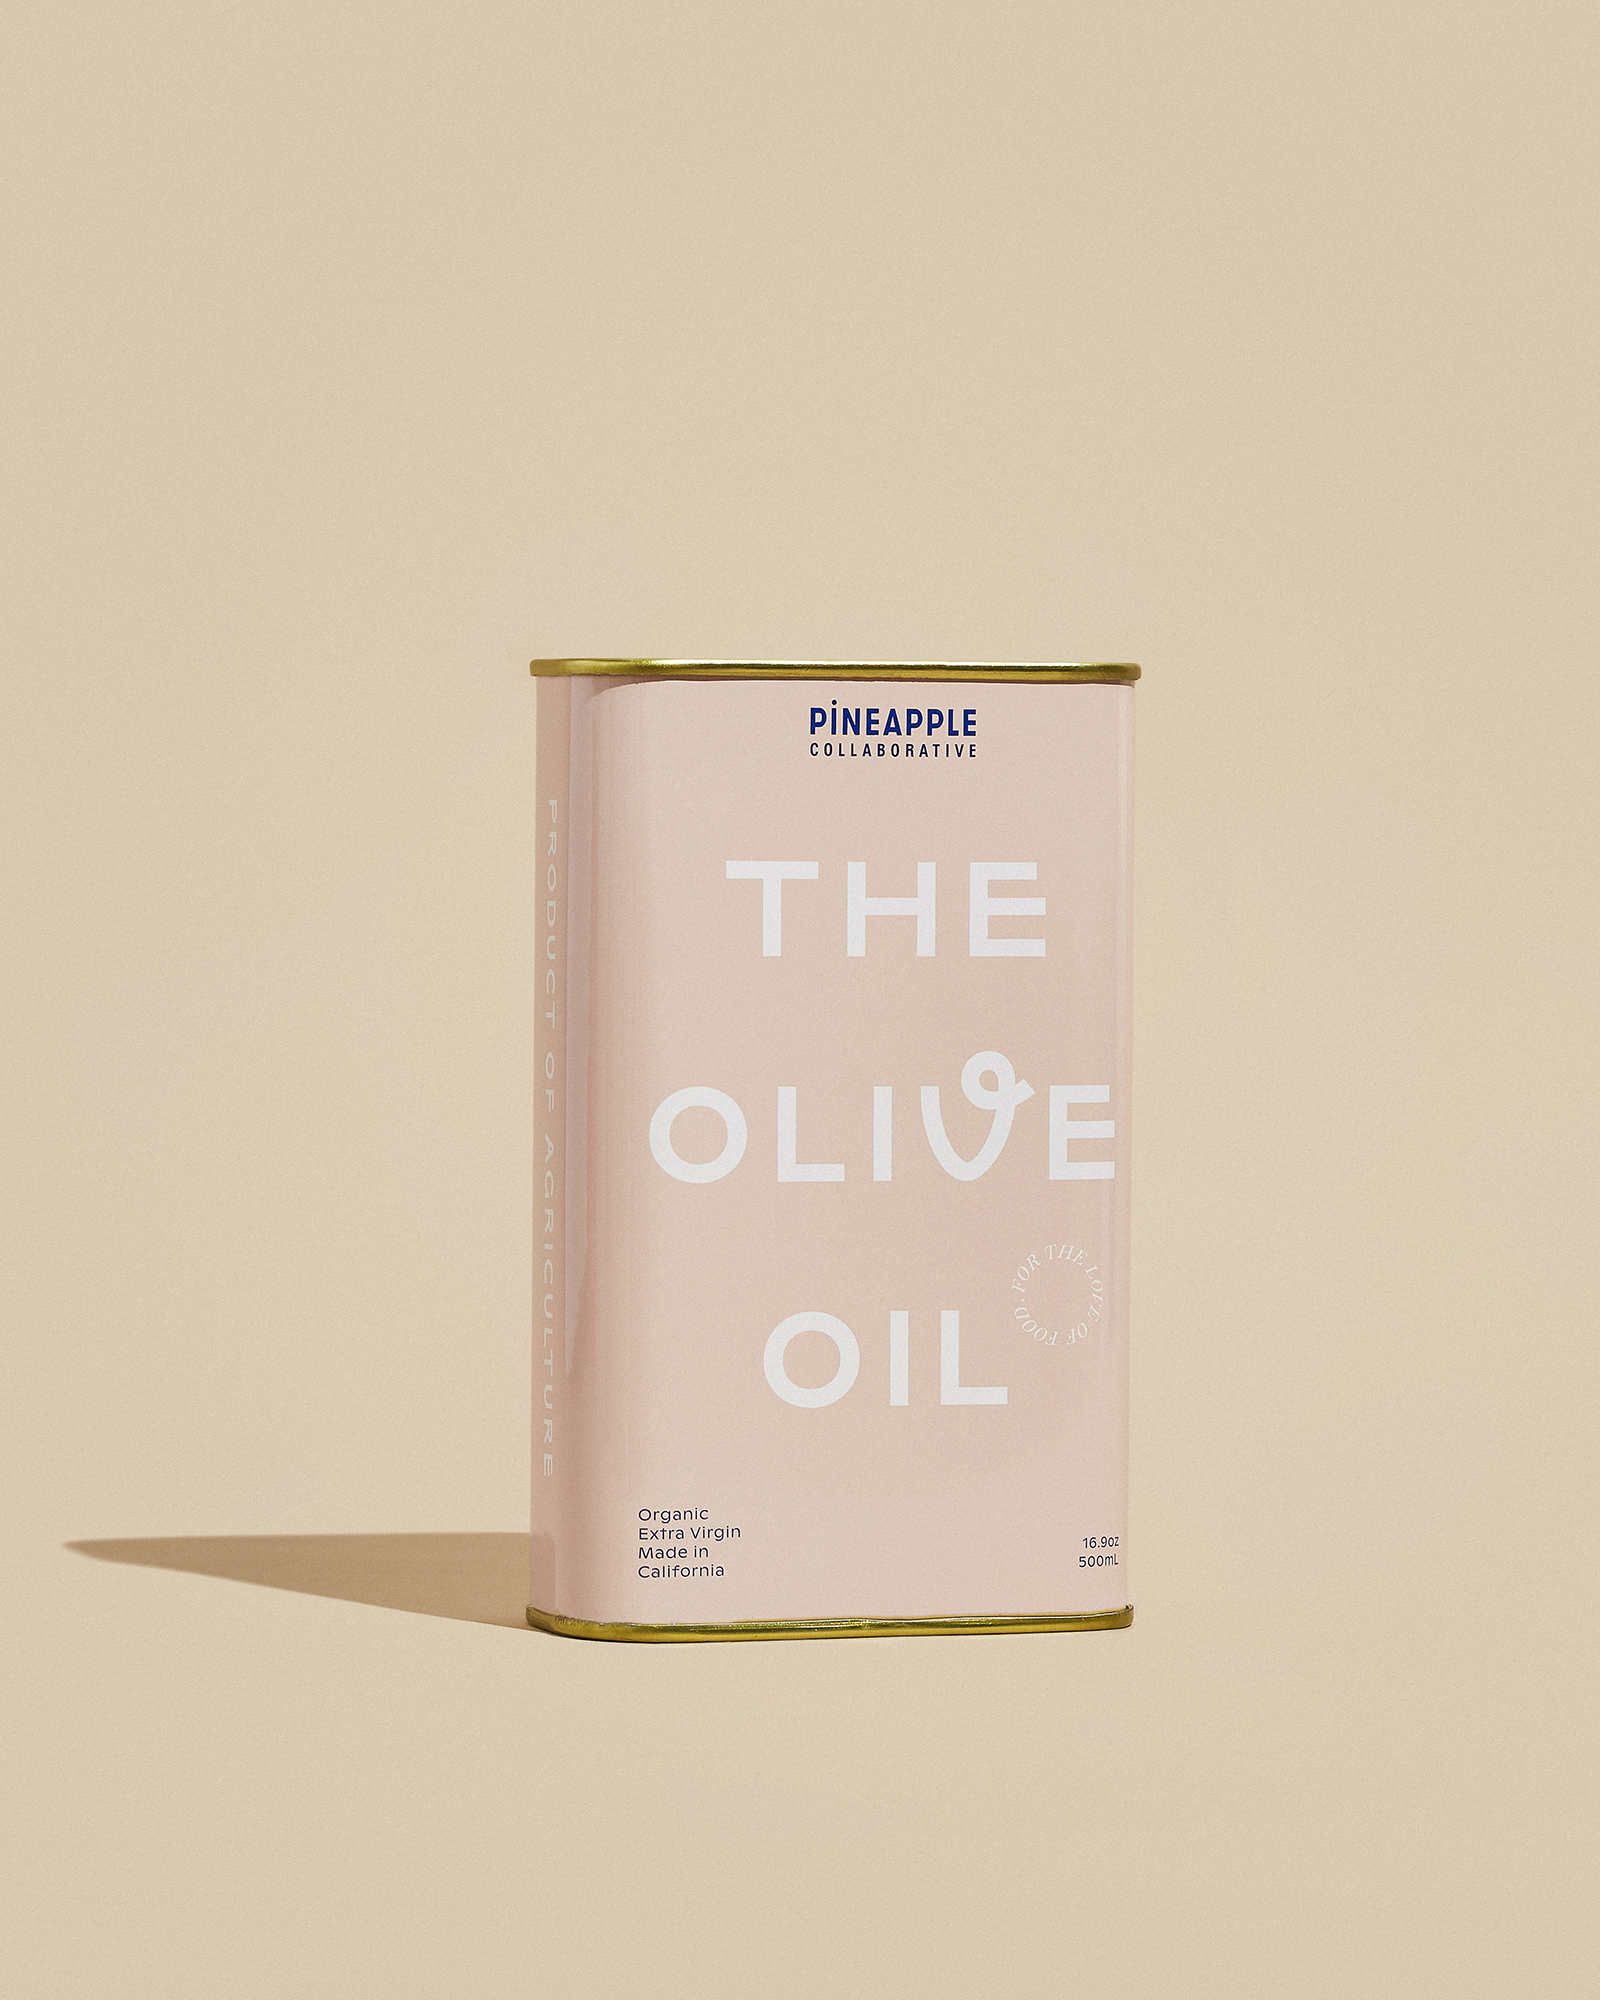 Pineapple Collaborative Olive Oil Haven Well Within | Haven Well Within